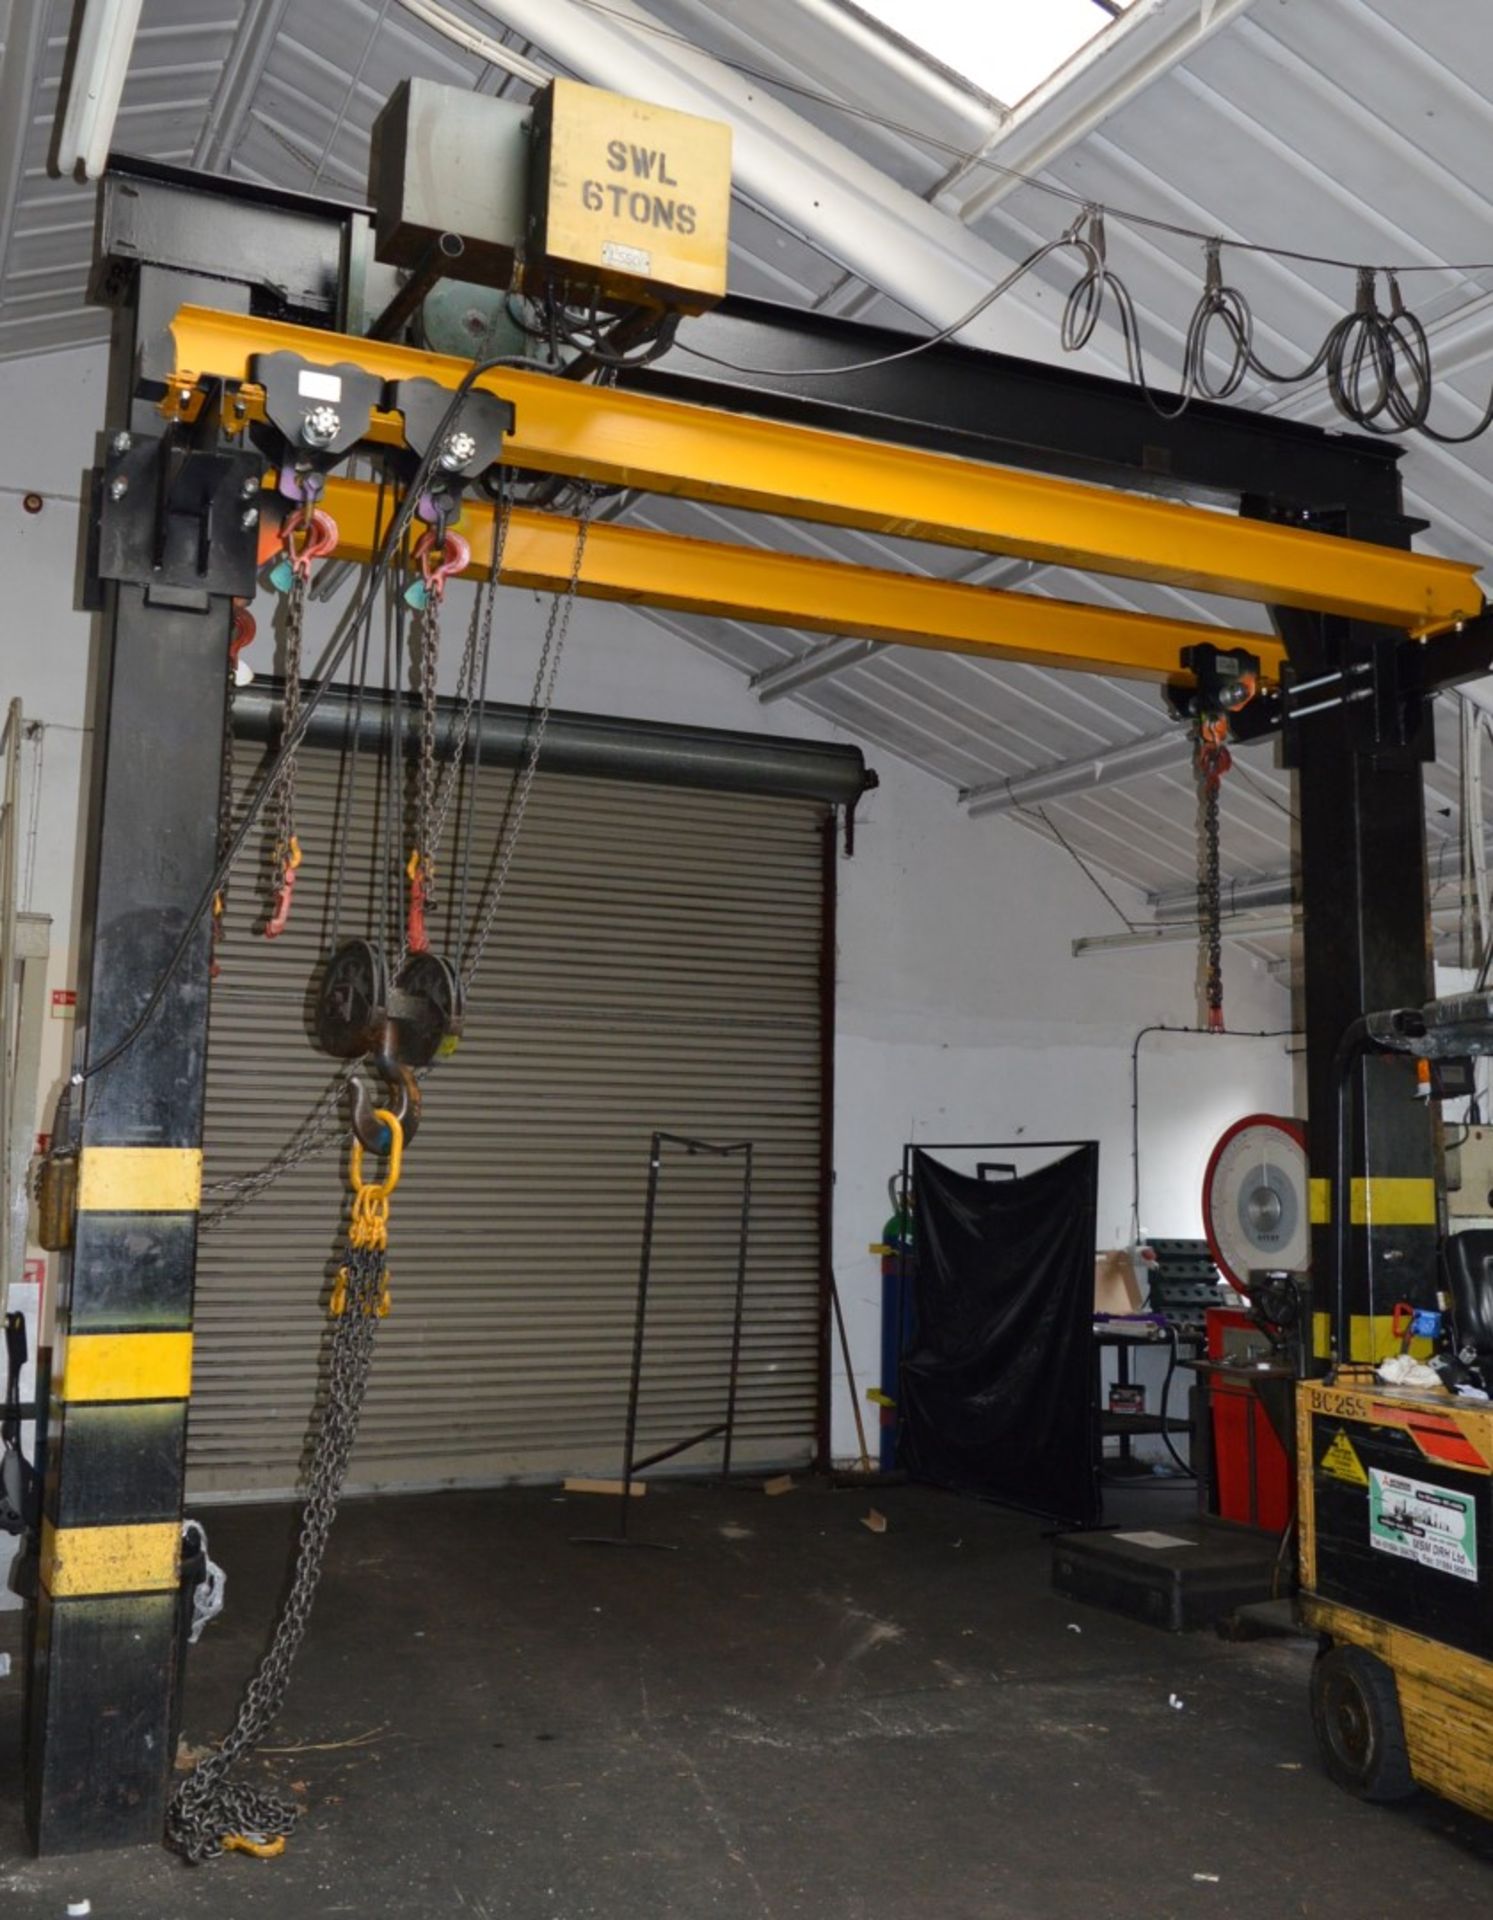 1 x Mercian Dual Rail Overhead Crane - 6 Ton Combined SWL - Fitted With Four Masterlift Type PTM30